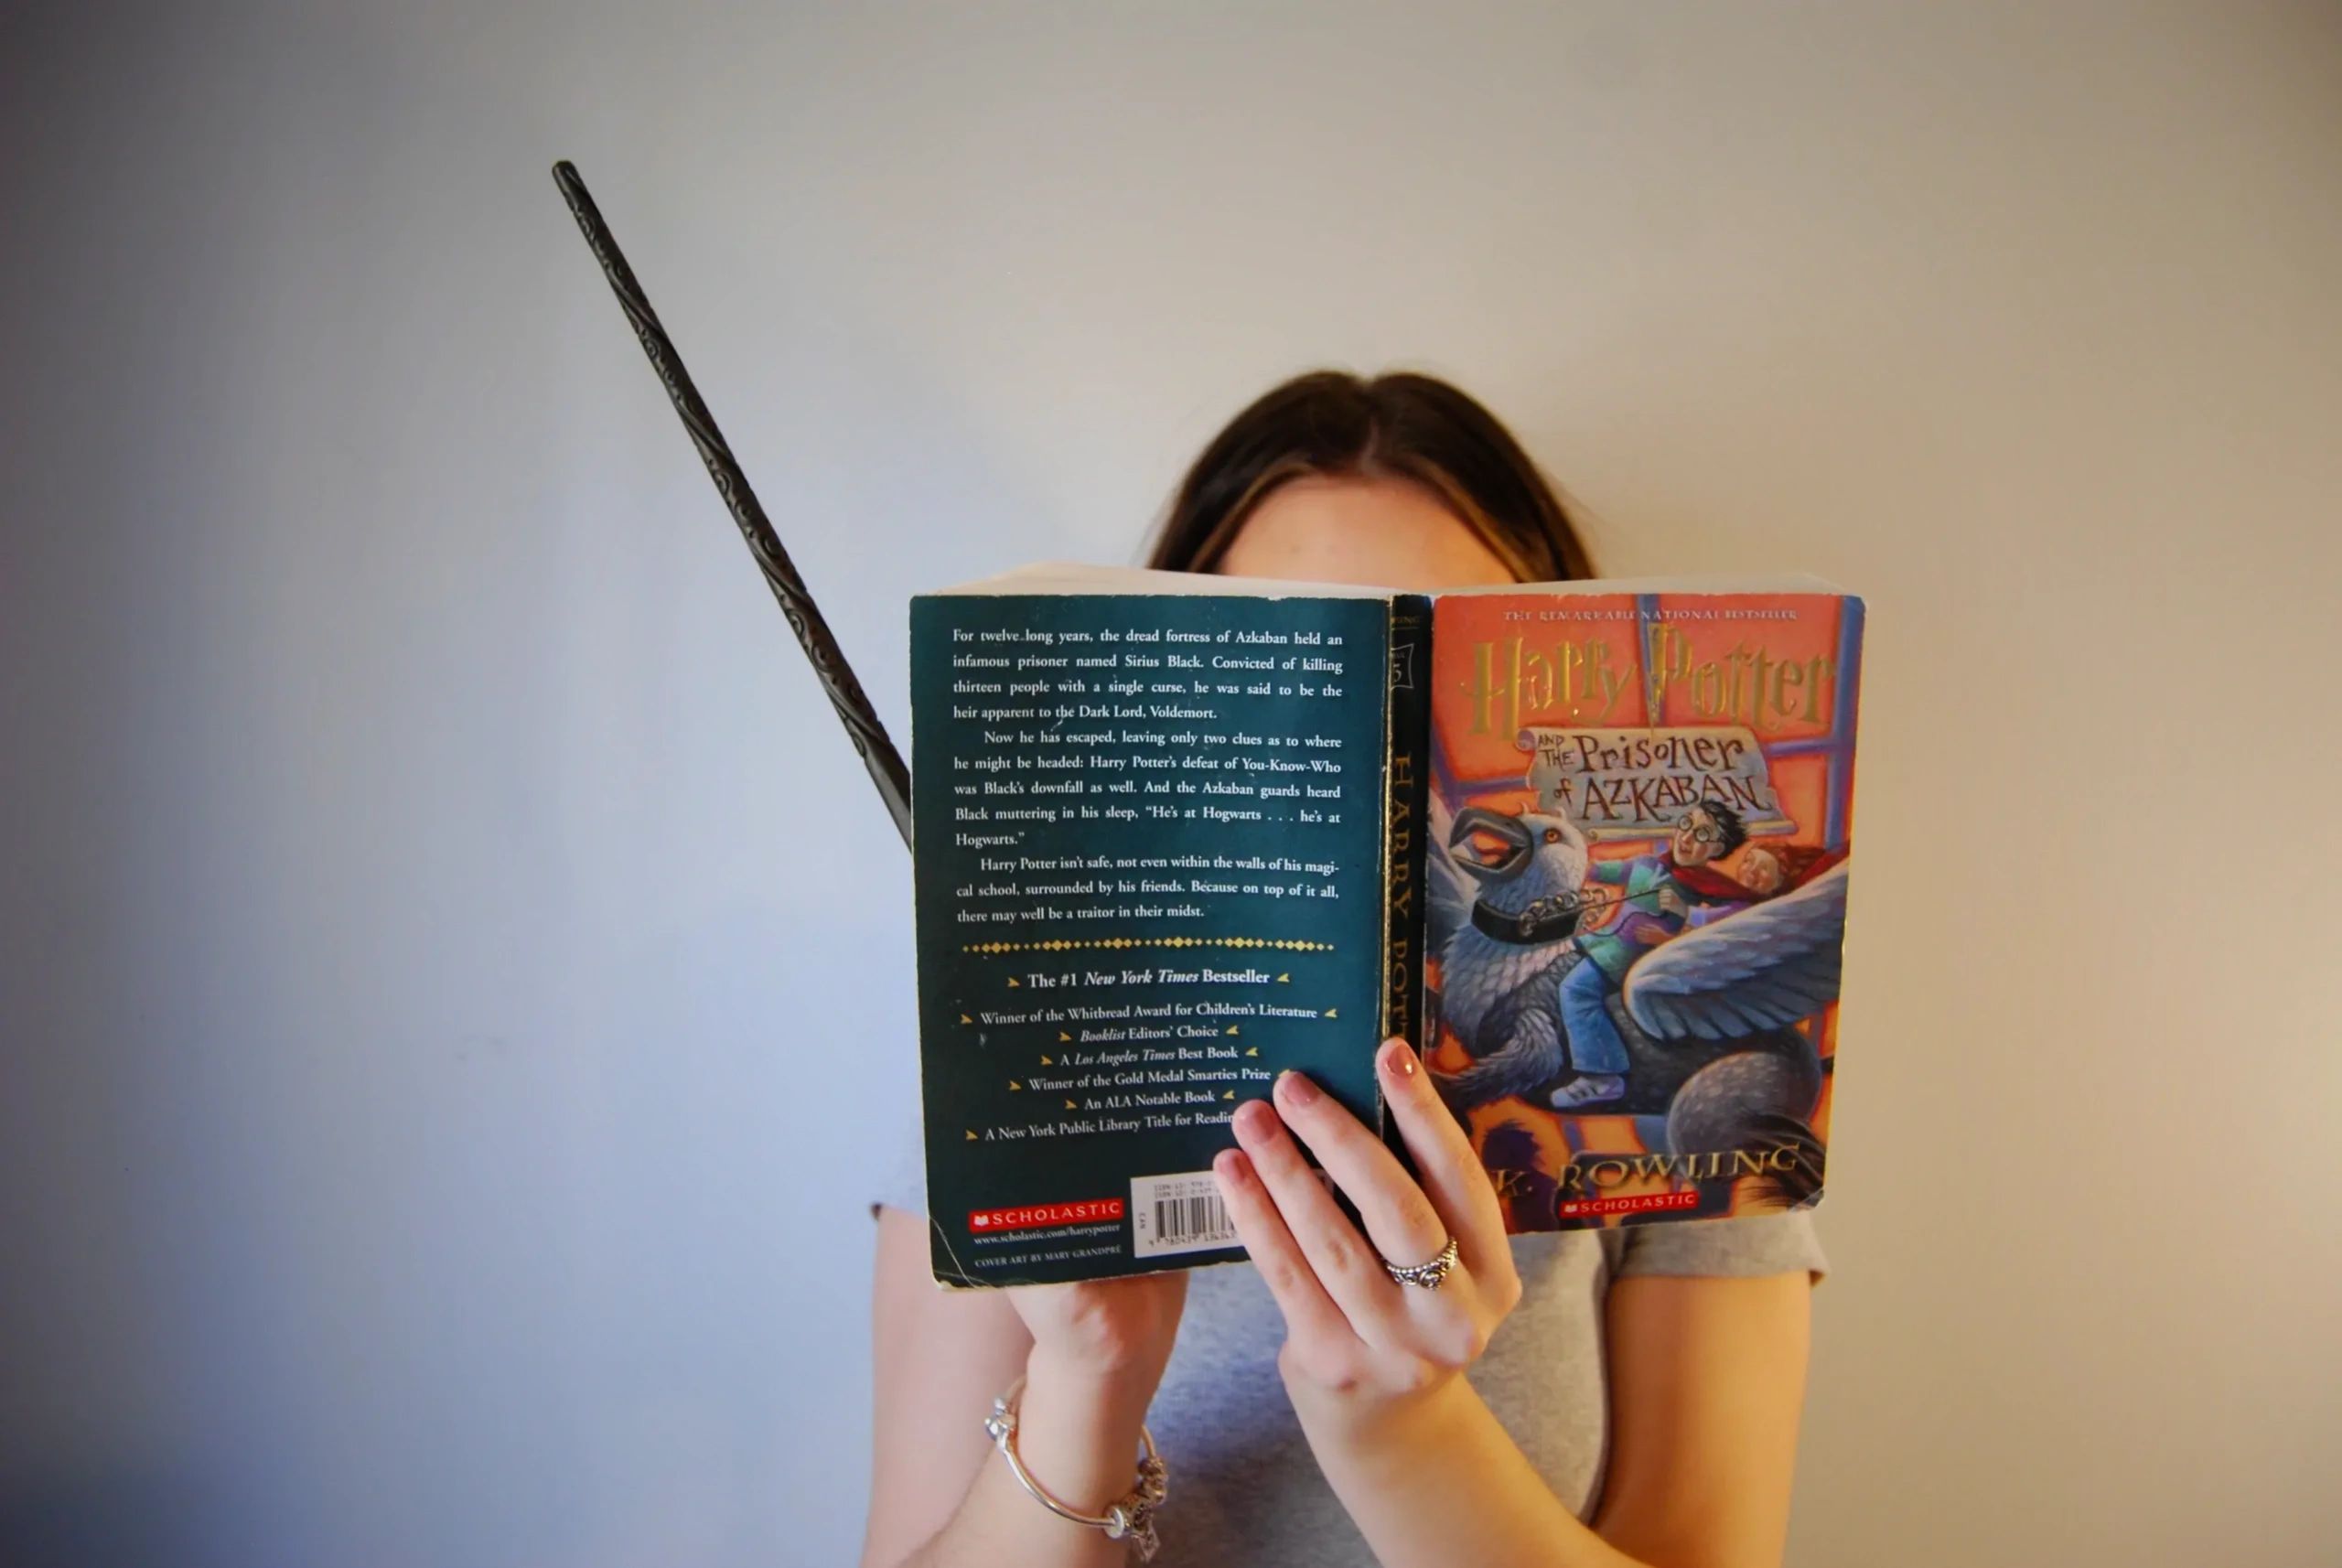 Self portrait holding a Harry Potter wand and The Prisoner of Azkaban book by J.K. Rowling